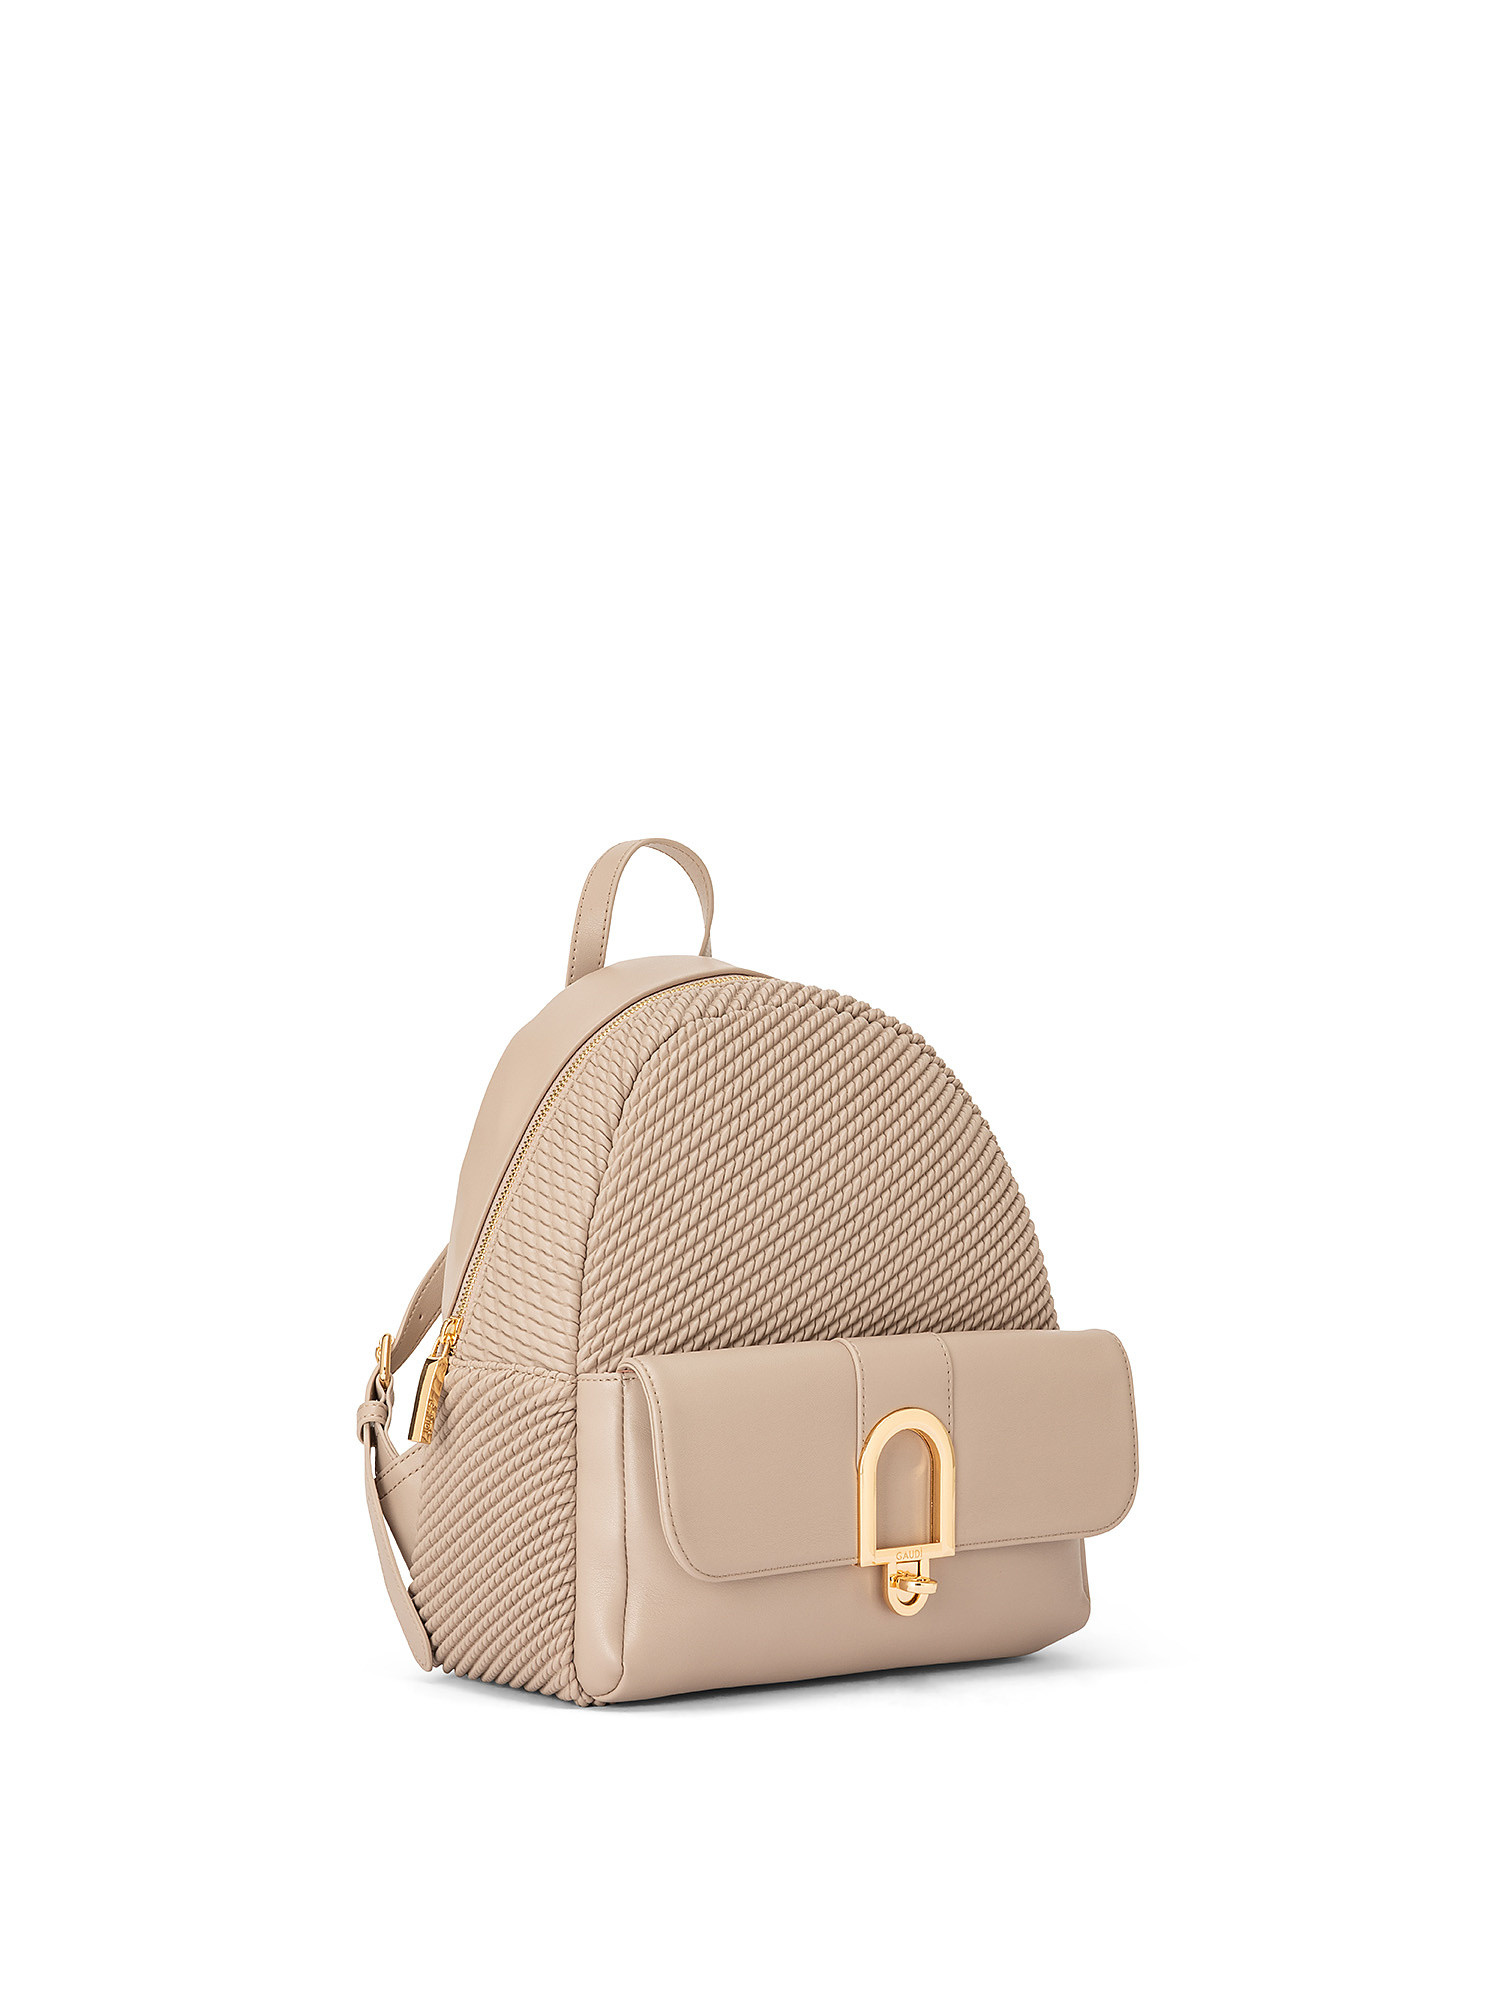 Thalissa backpack, Dove Grey, large image number 1